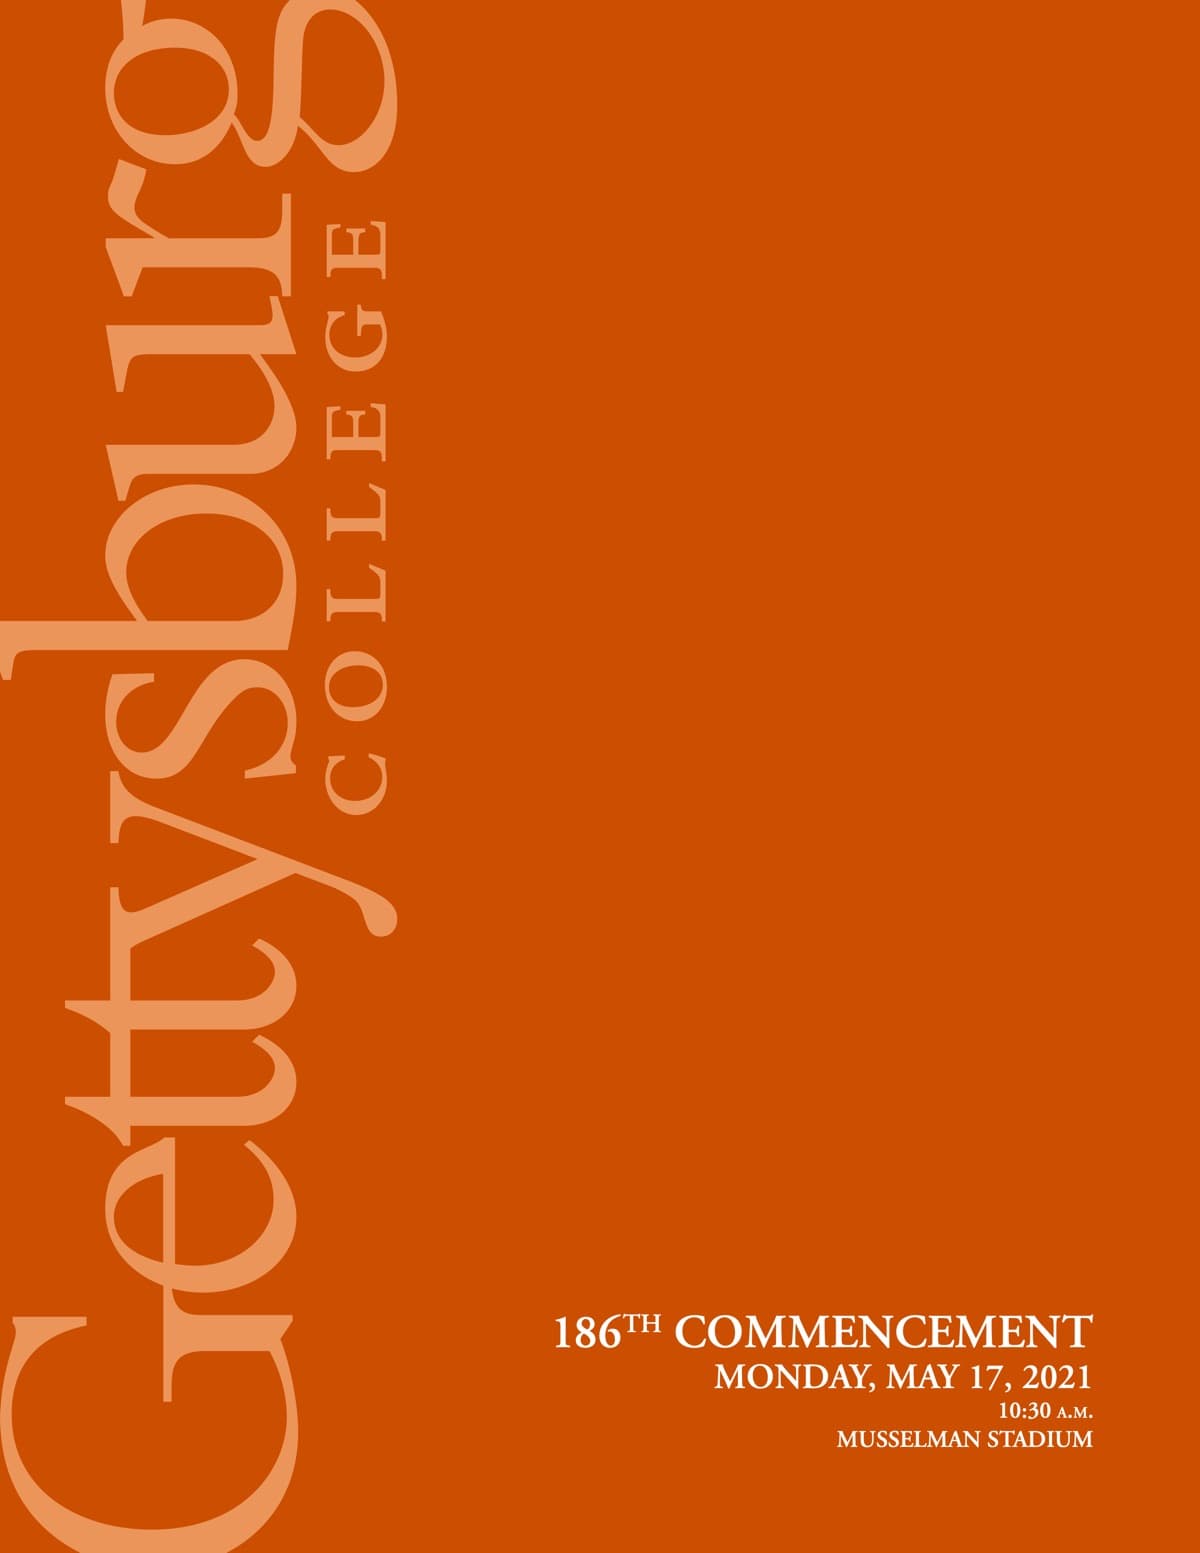 186th Commencement